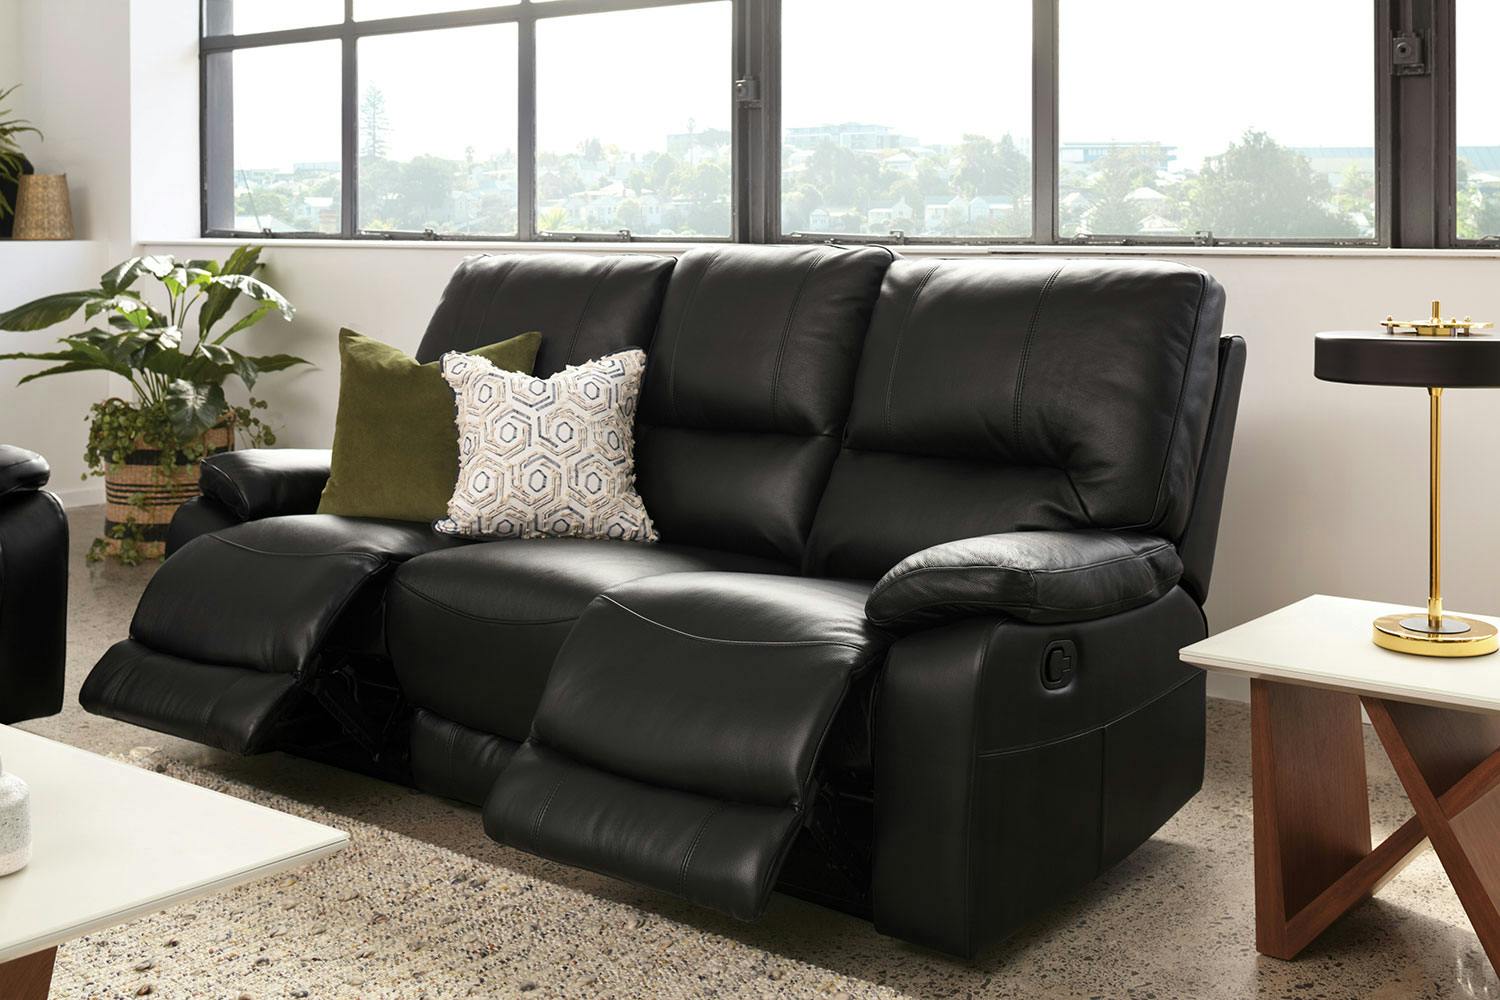 Waterford 3 Seater Leather Recliner Sofa